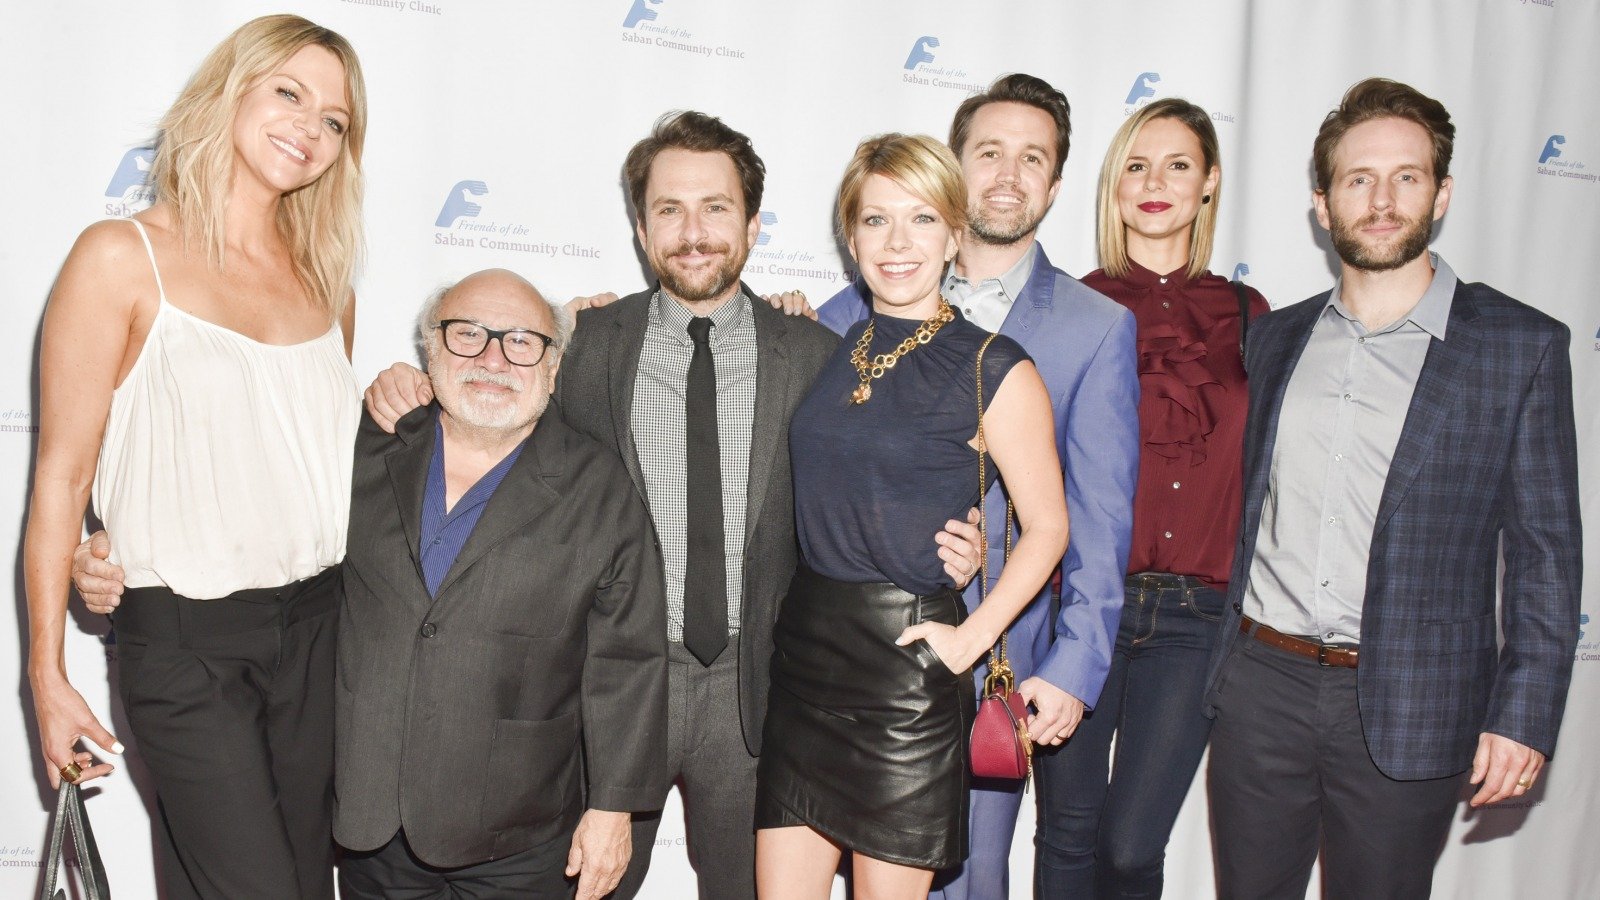 The Real-Life Partners Of The It's Always Sunny In Philadelphia Cast